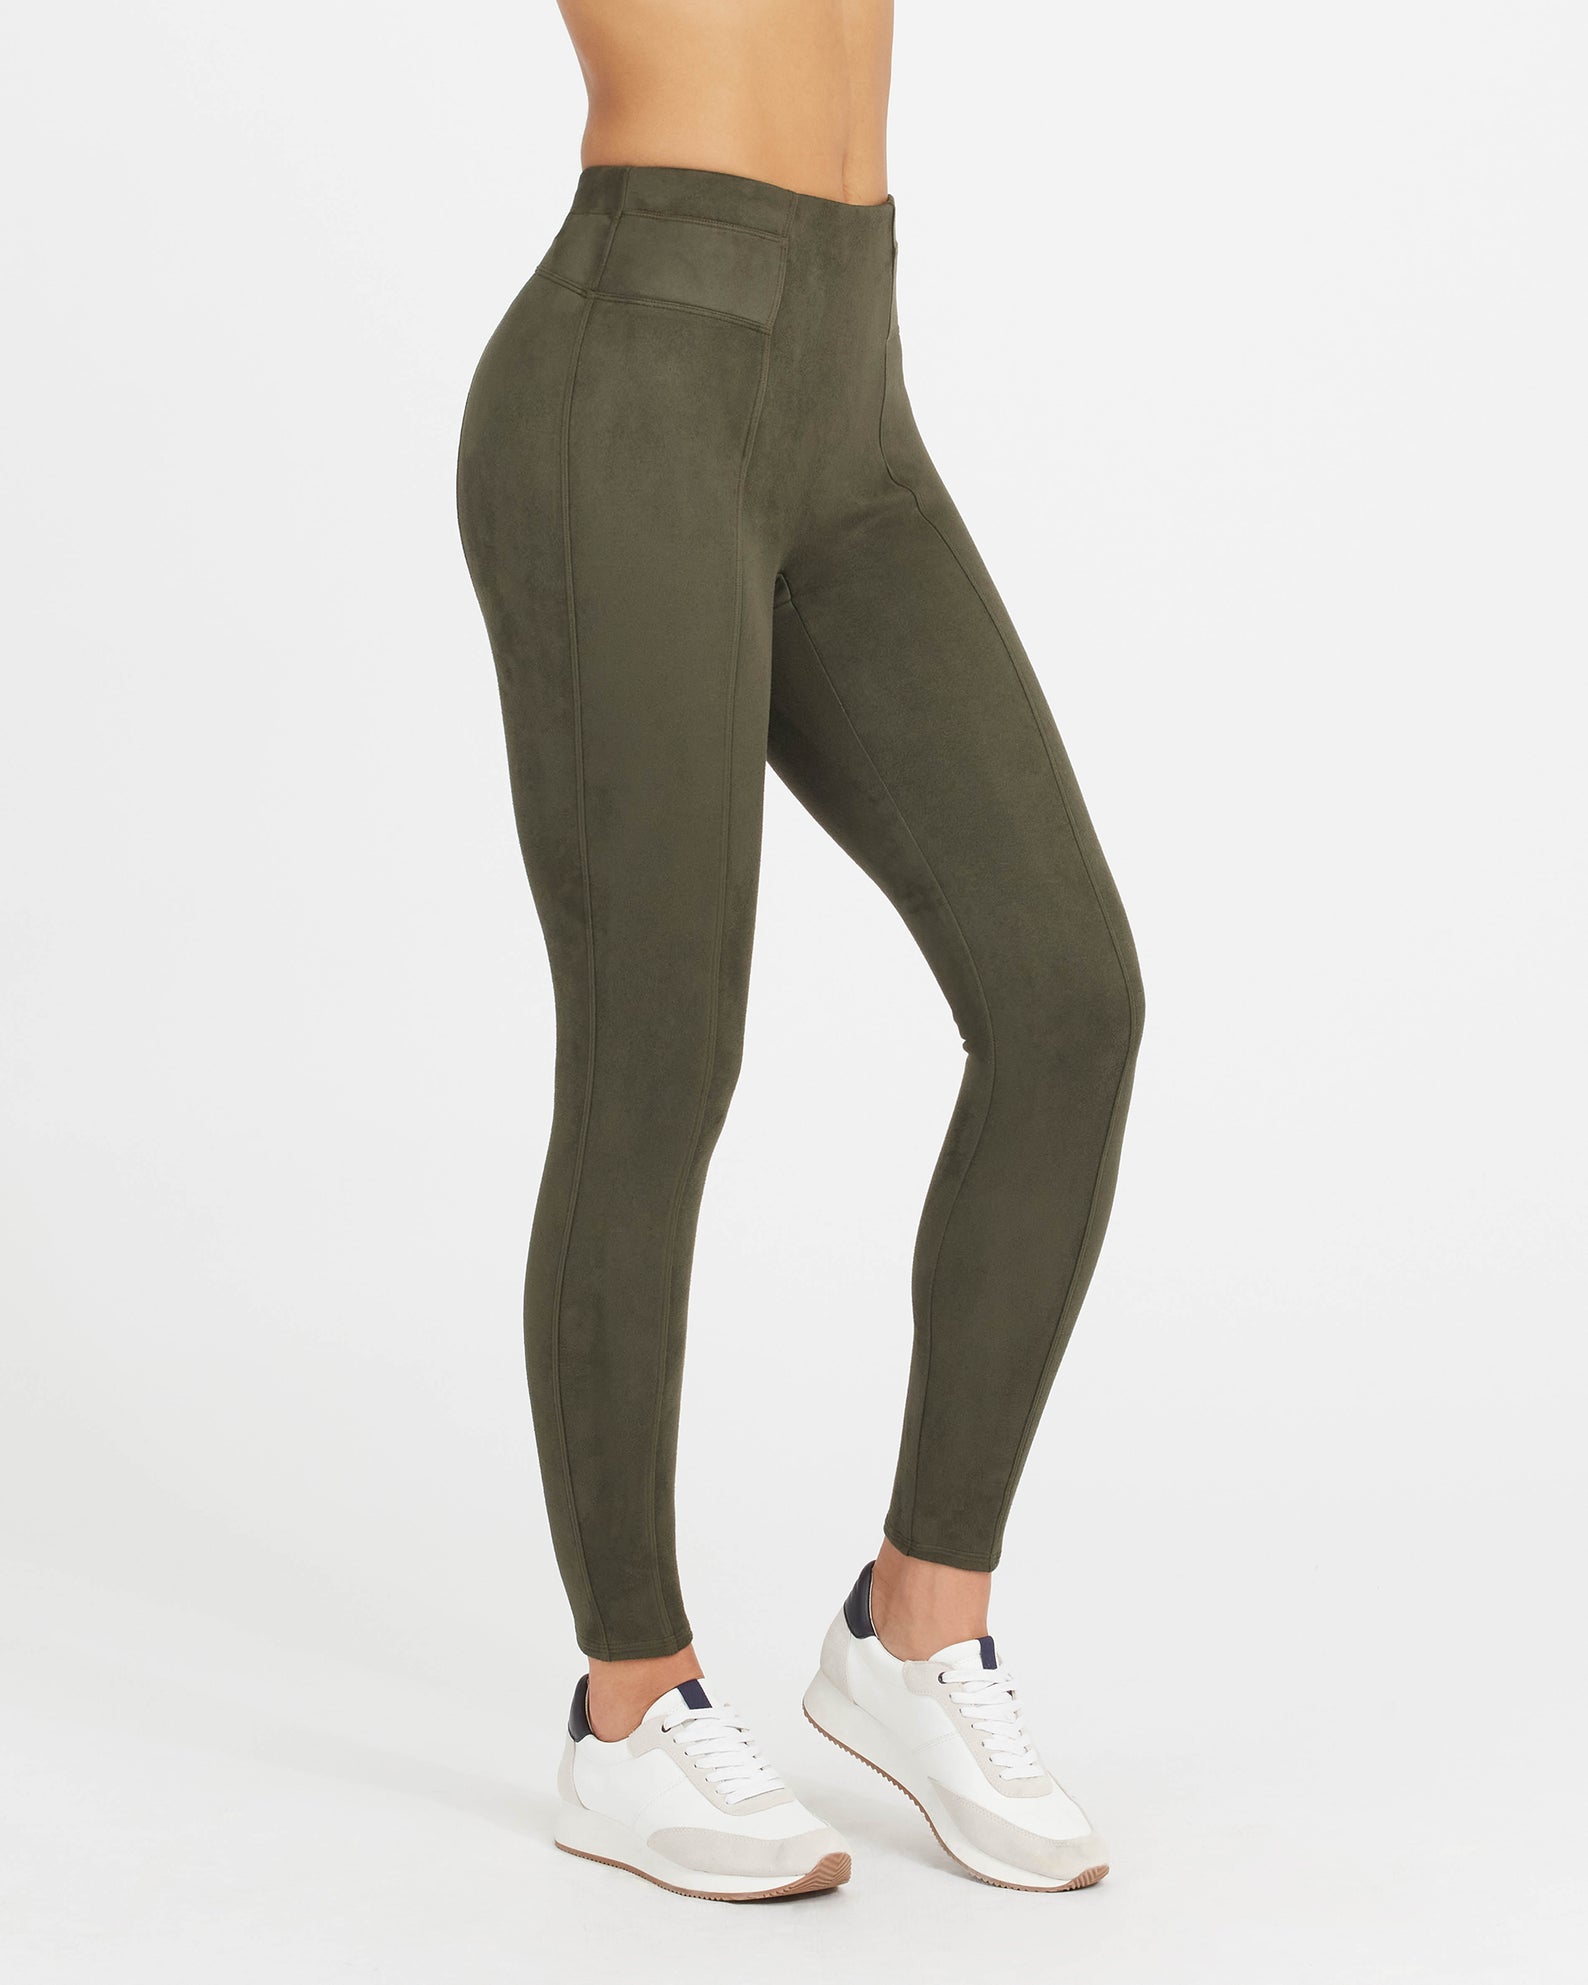 Spanx Leggings Womens Olive Green Knit Ankle Zip High Rise